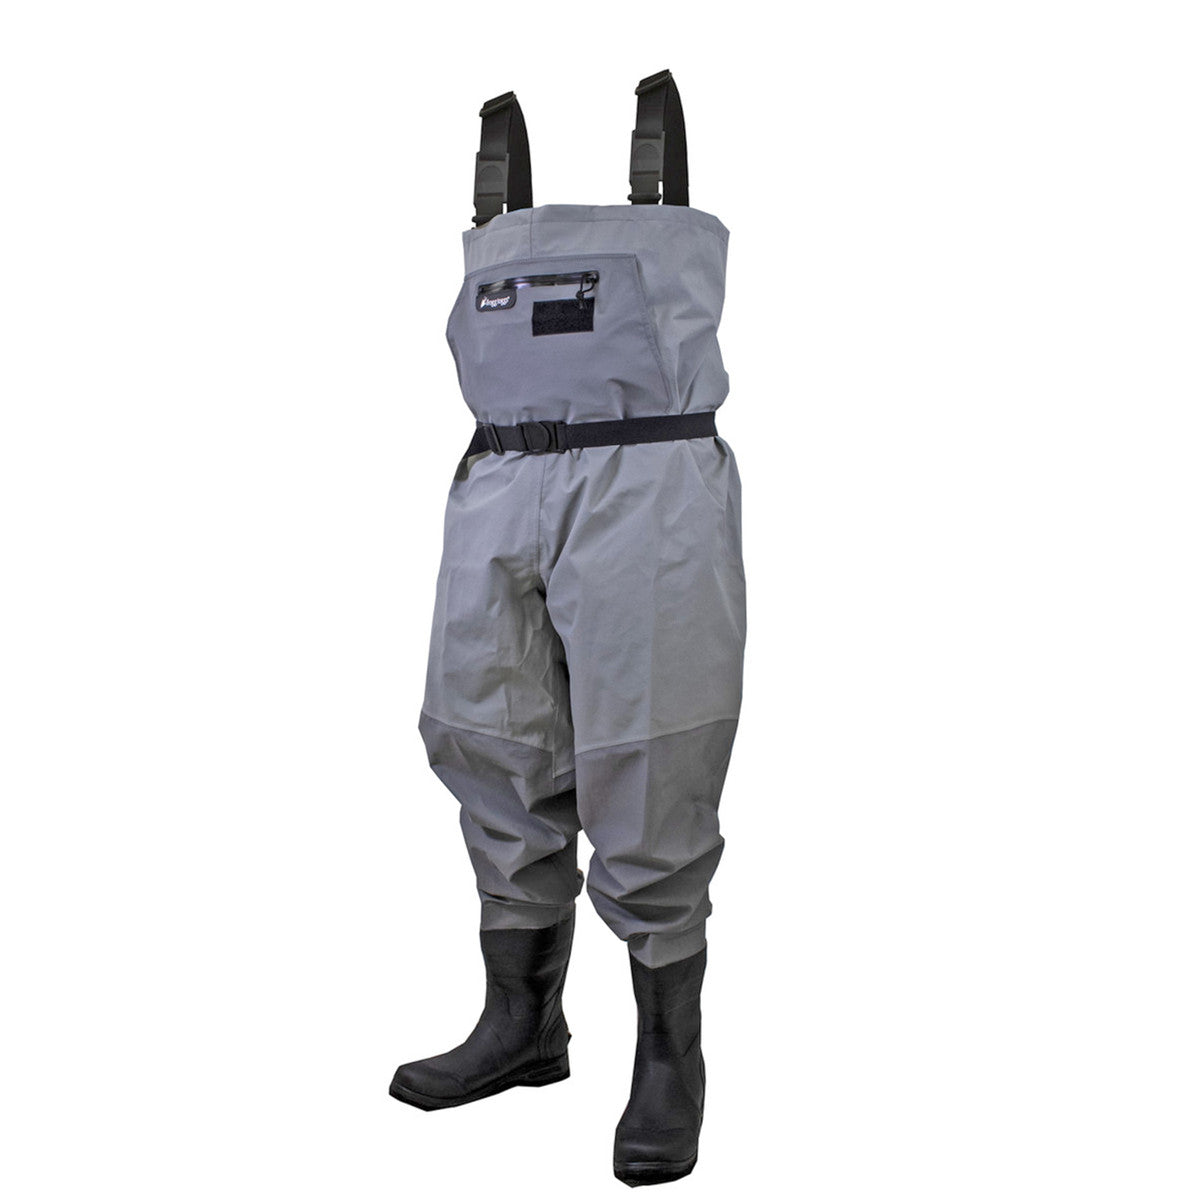 FROGG TOGGS MEN'S HELLBENDER PRO LUG SOLE CHEST WADER